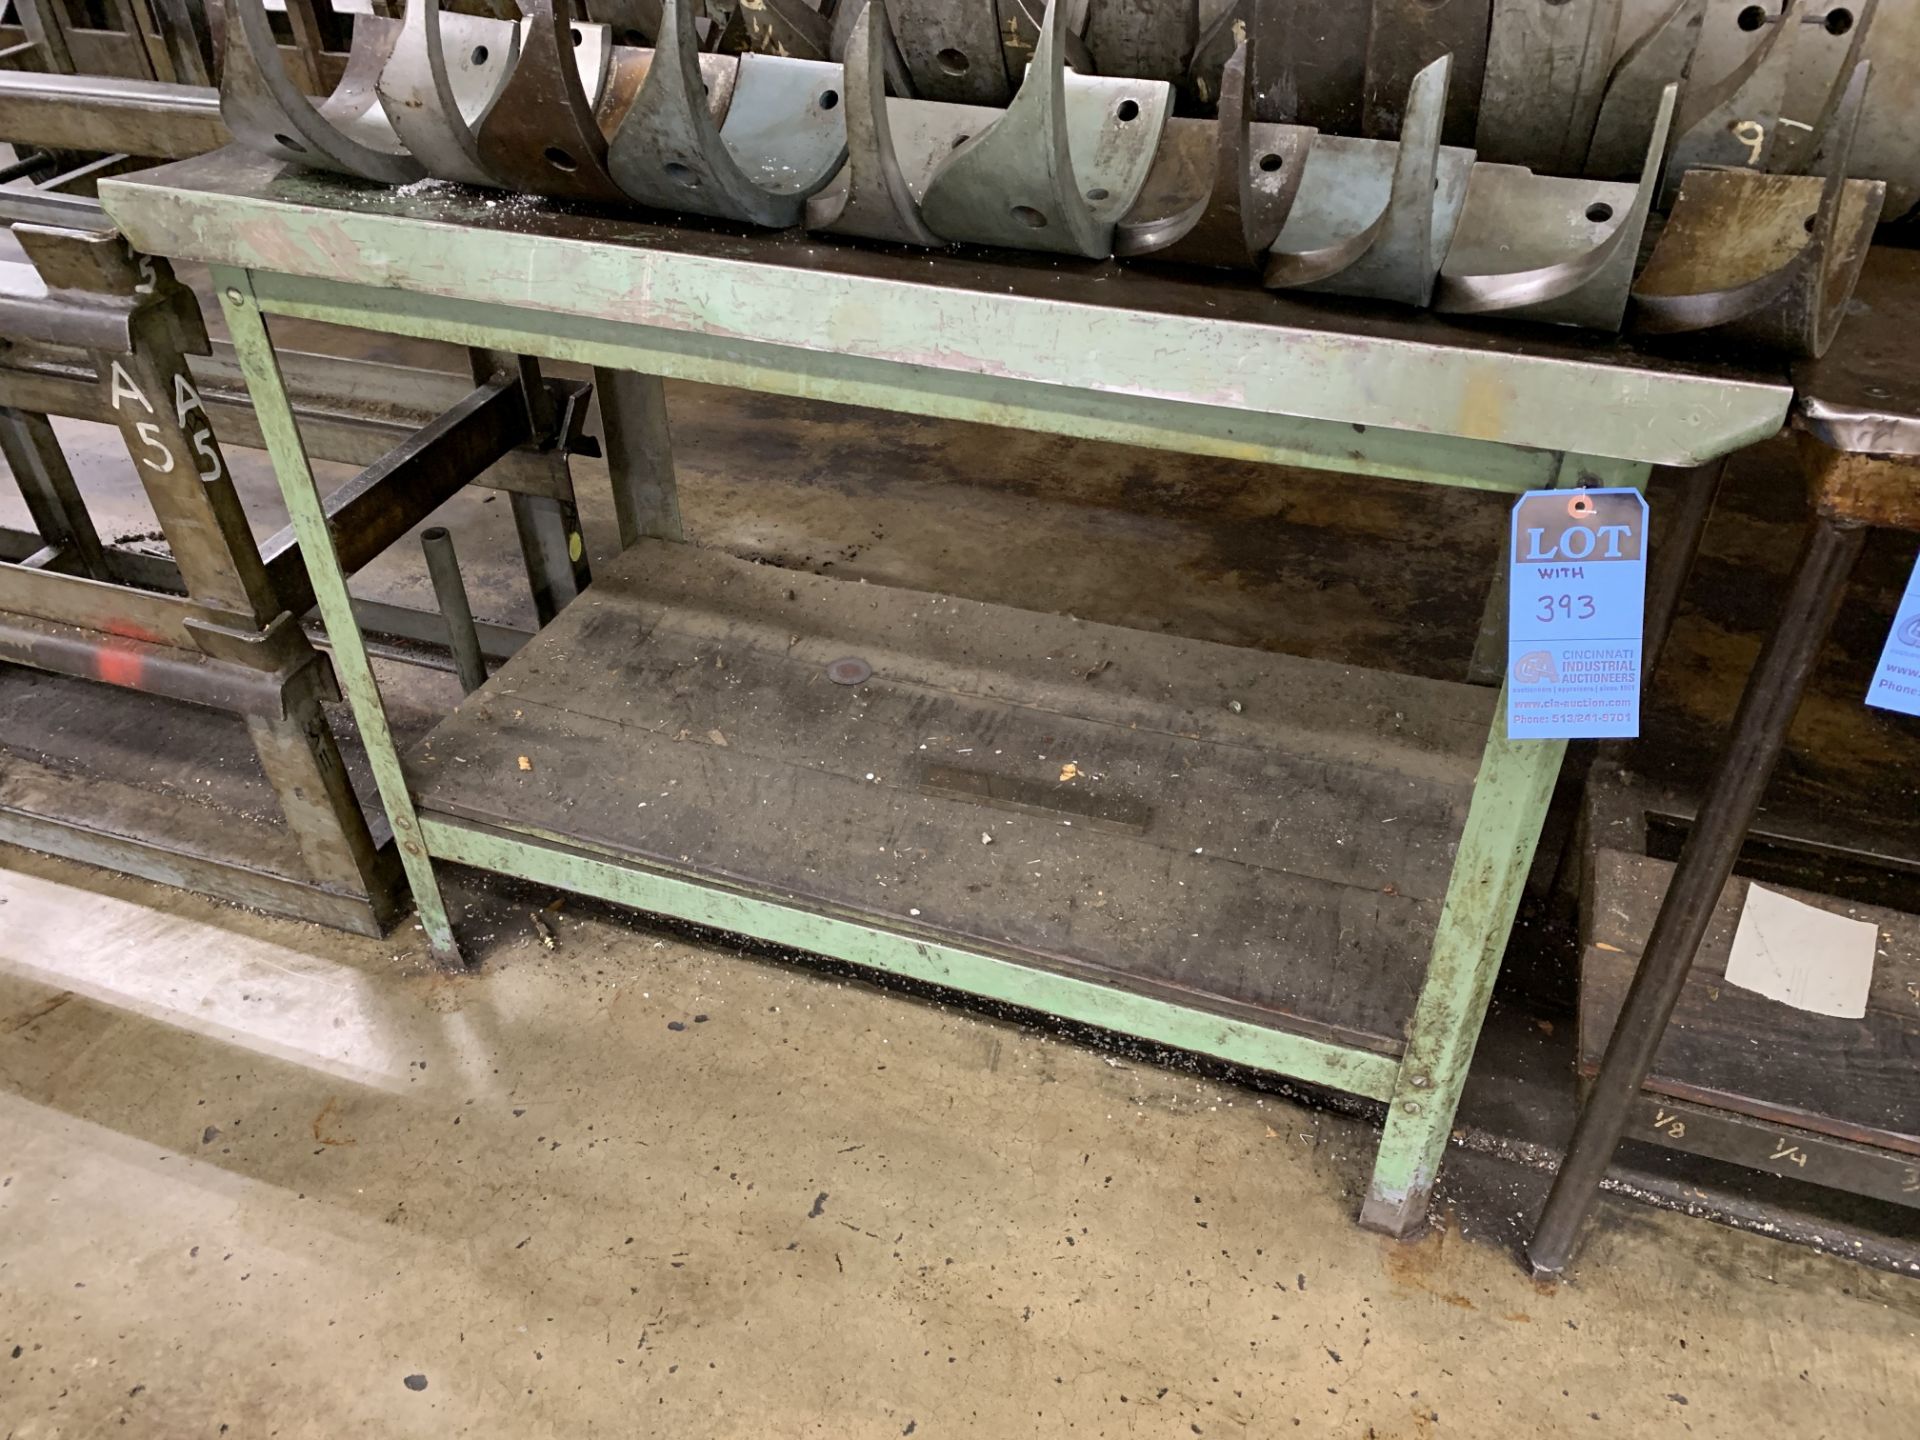 MISCELLANEOUS SIZE STEEL FRAME BENCH, (1) WITH VISE **DELAY REMOVAL - PICKUP 3/29/2019** - Image 4 of 4